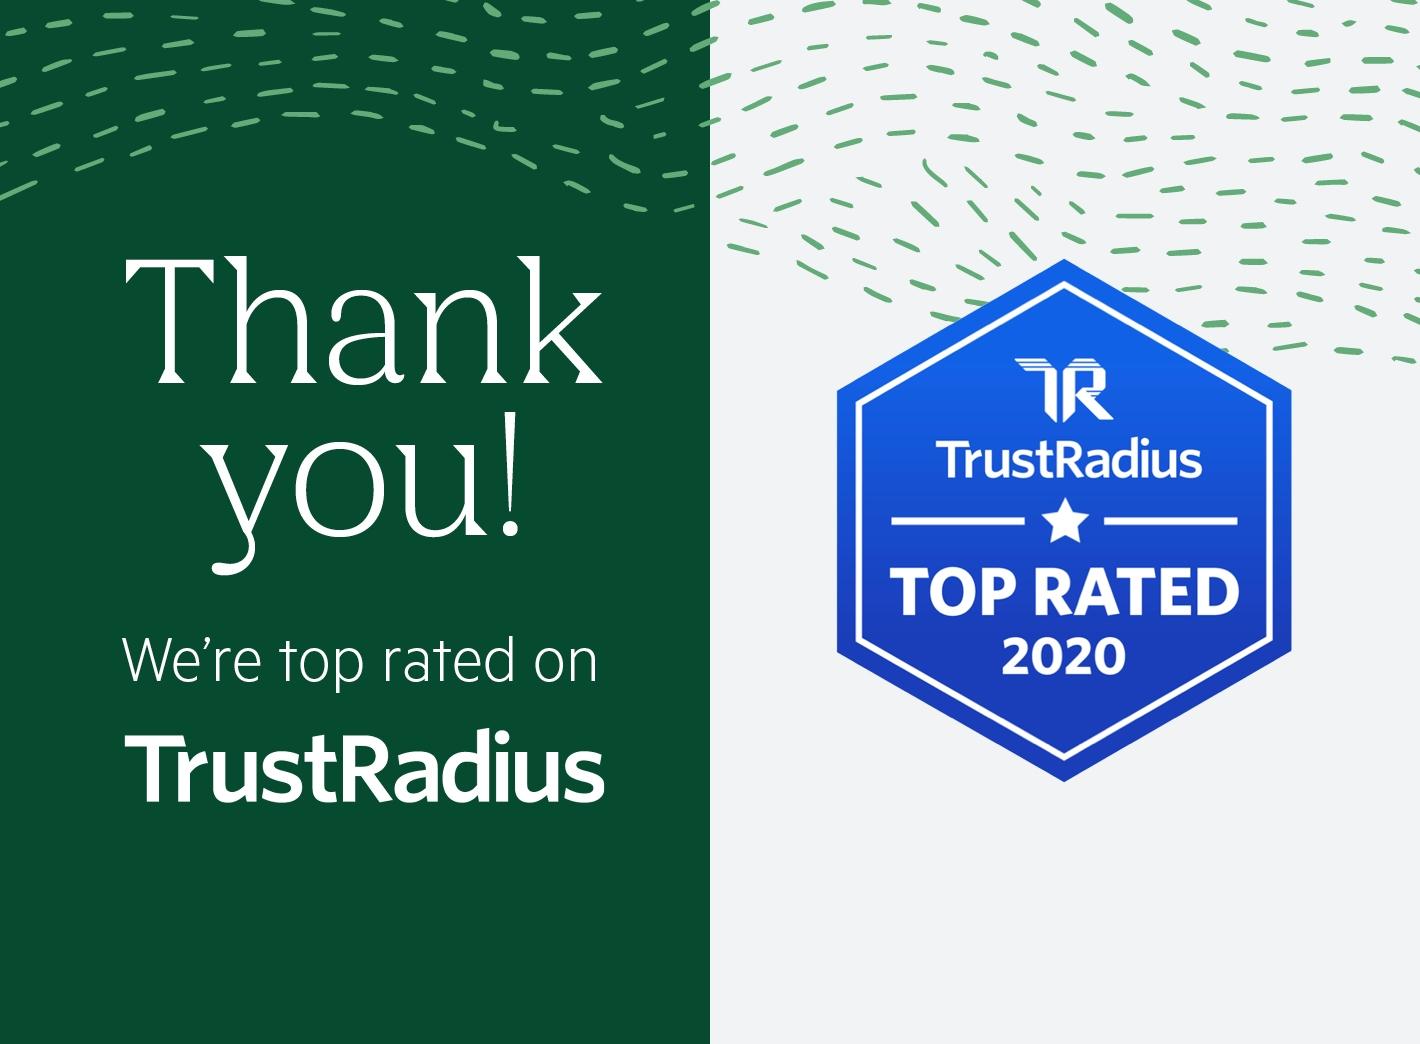 "We're top rated on TrustRadius"